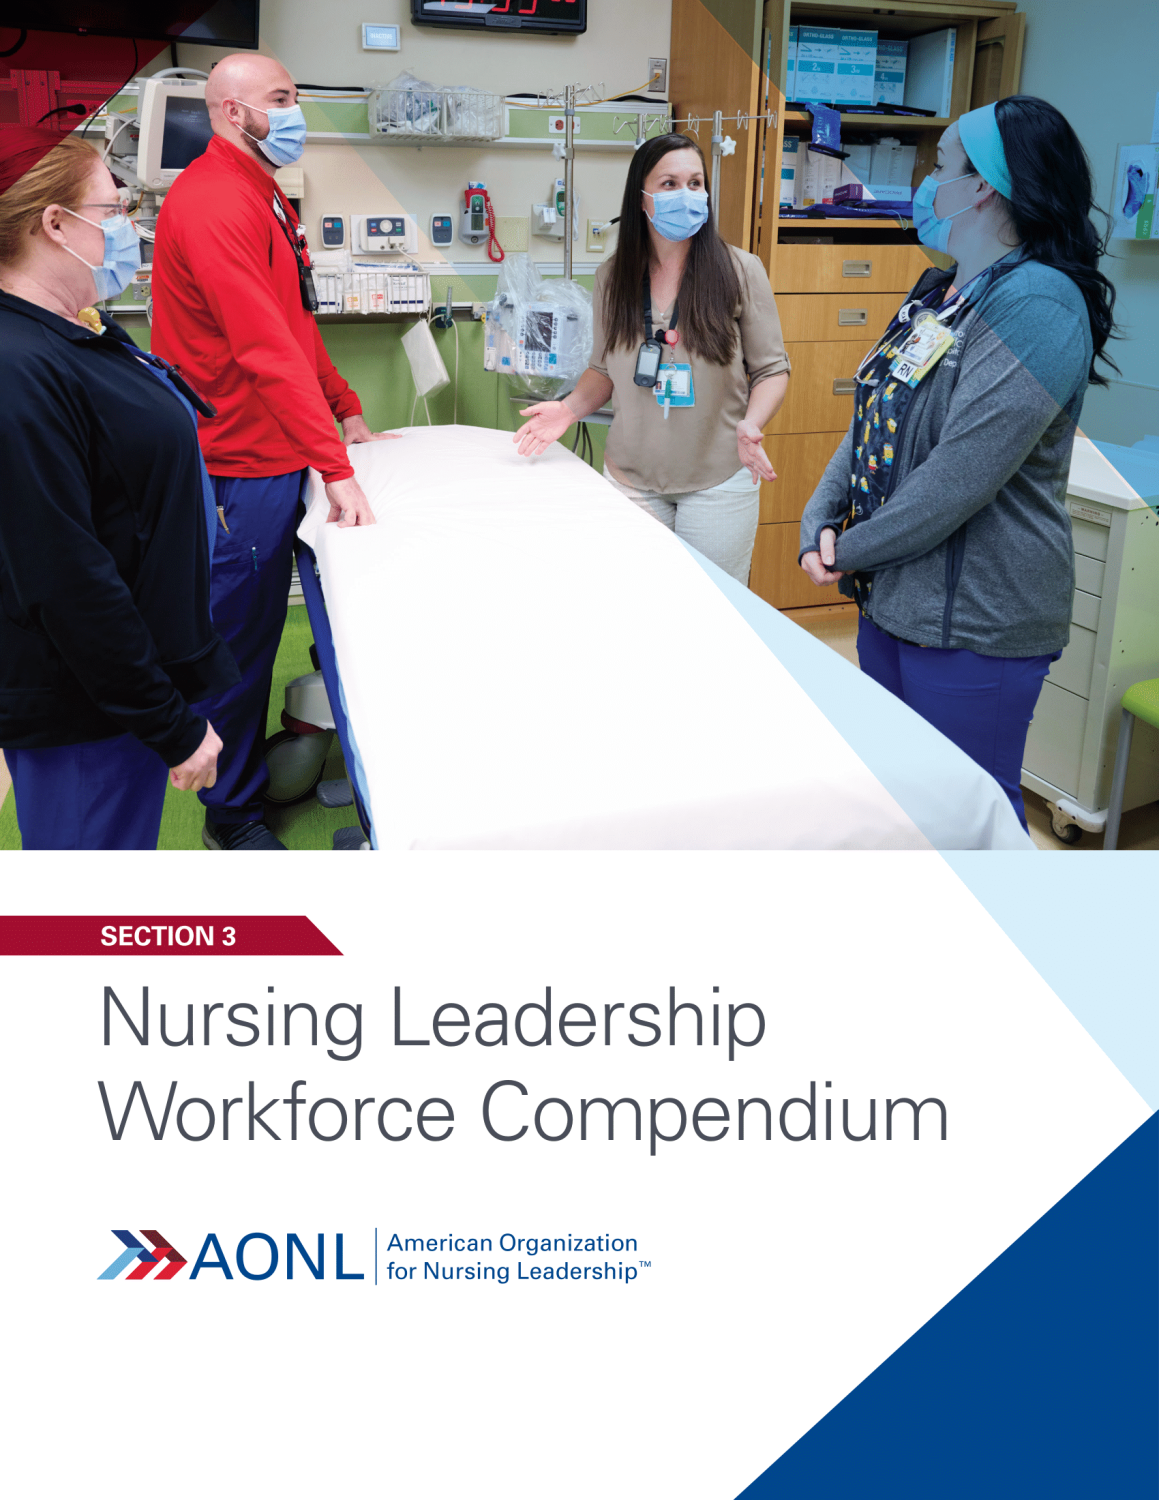 AONL Workforce Compendium Section 3 Cover.